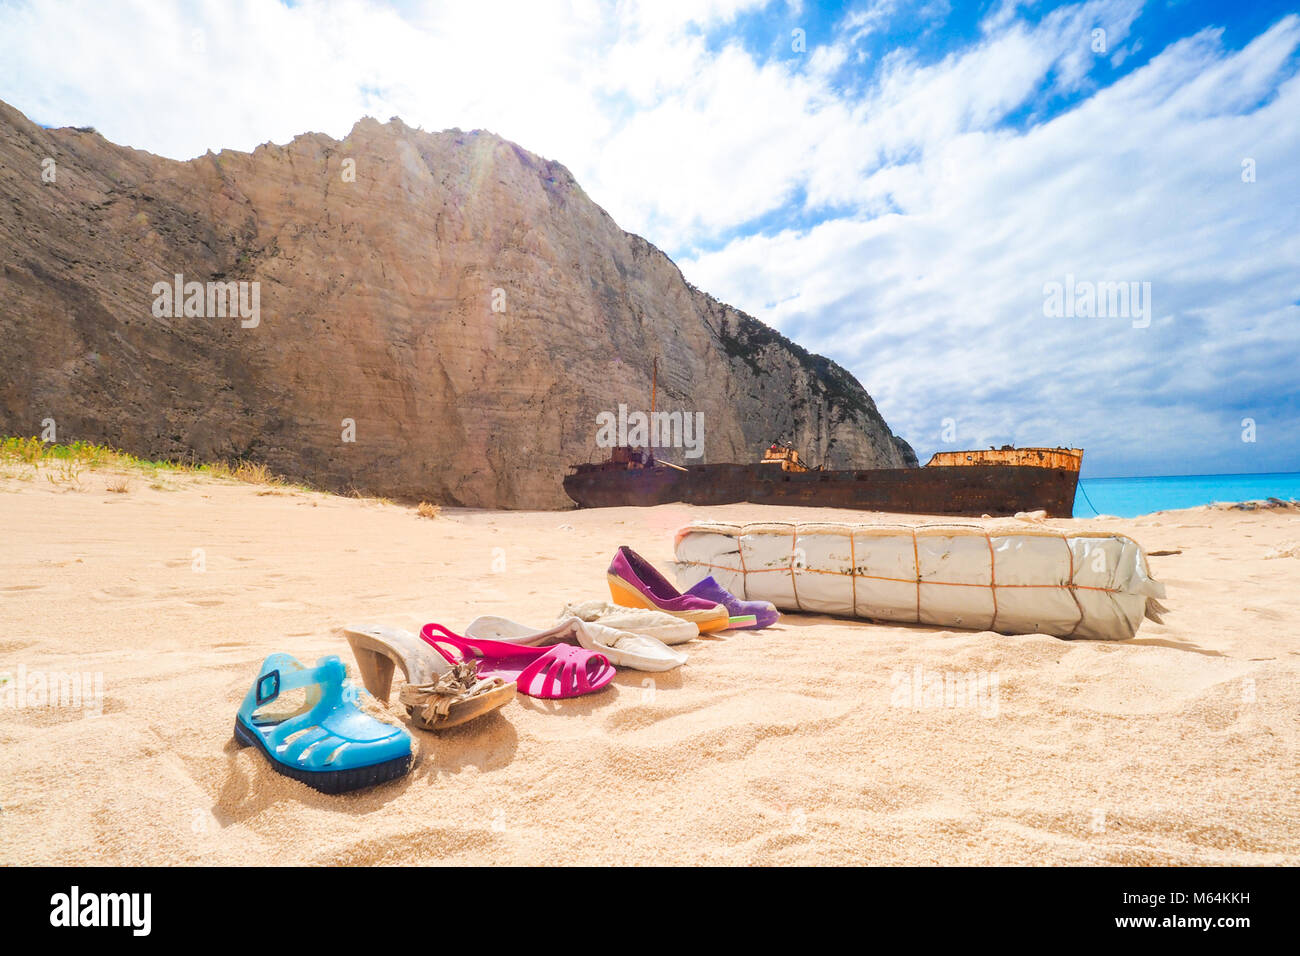 Trash left at Navagio beach, with Panagiotis shipwreck in back. Zakynthos, Greece. Artistic view. Stock Photo